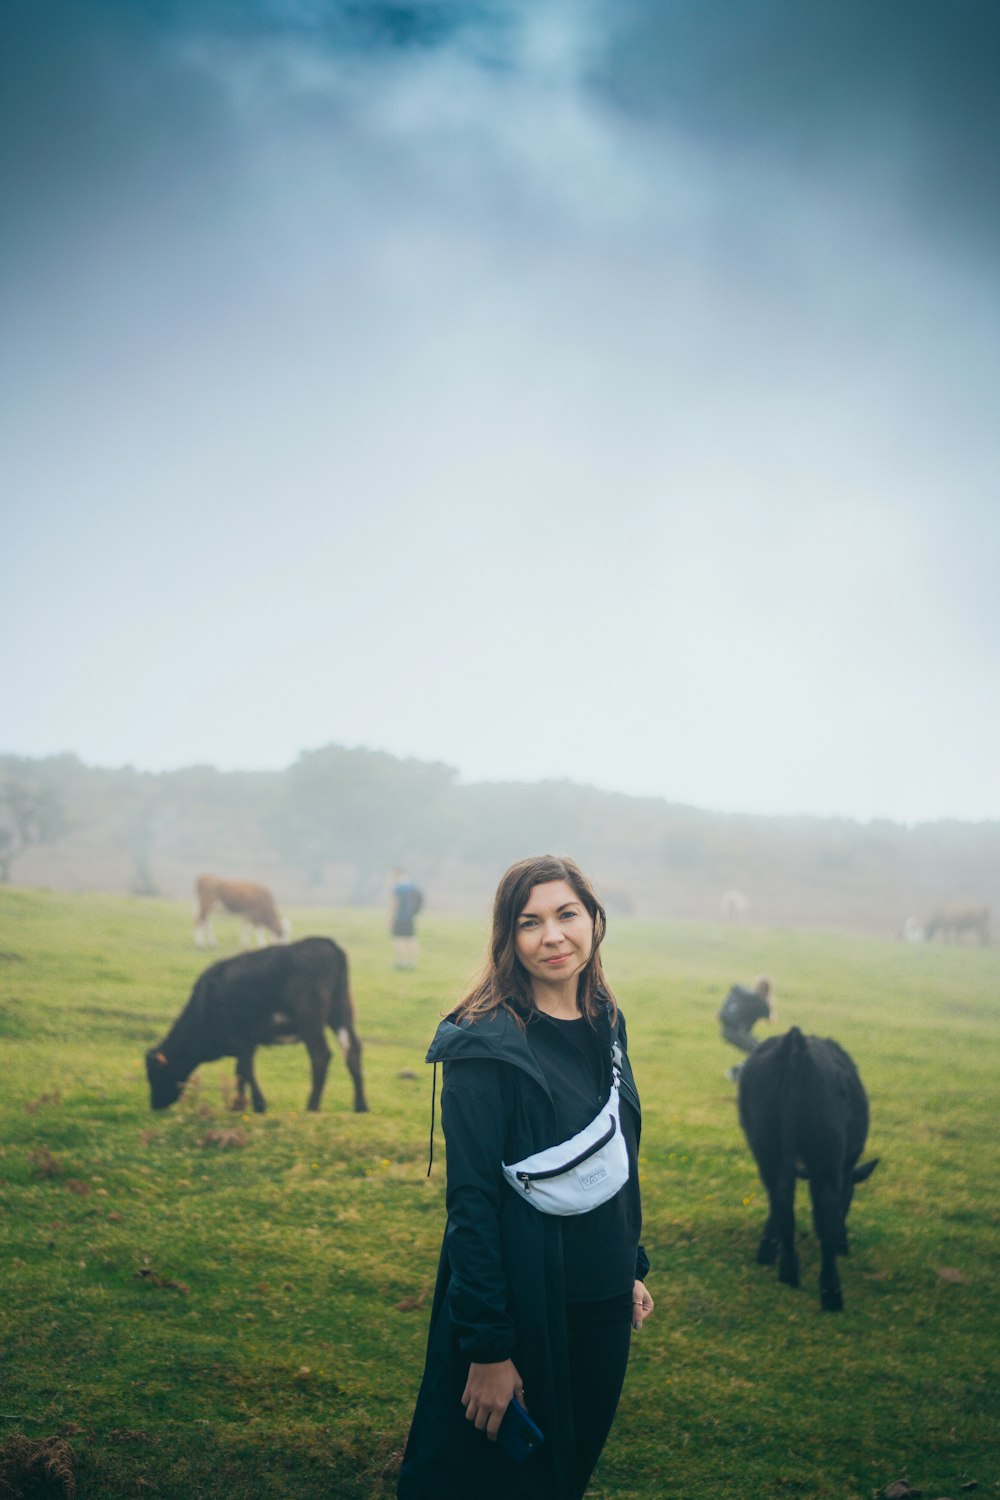 a person standing in a field with cows